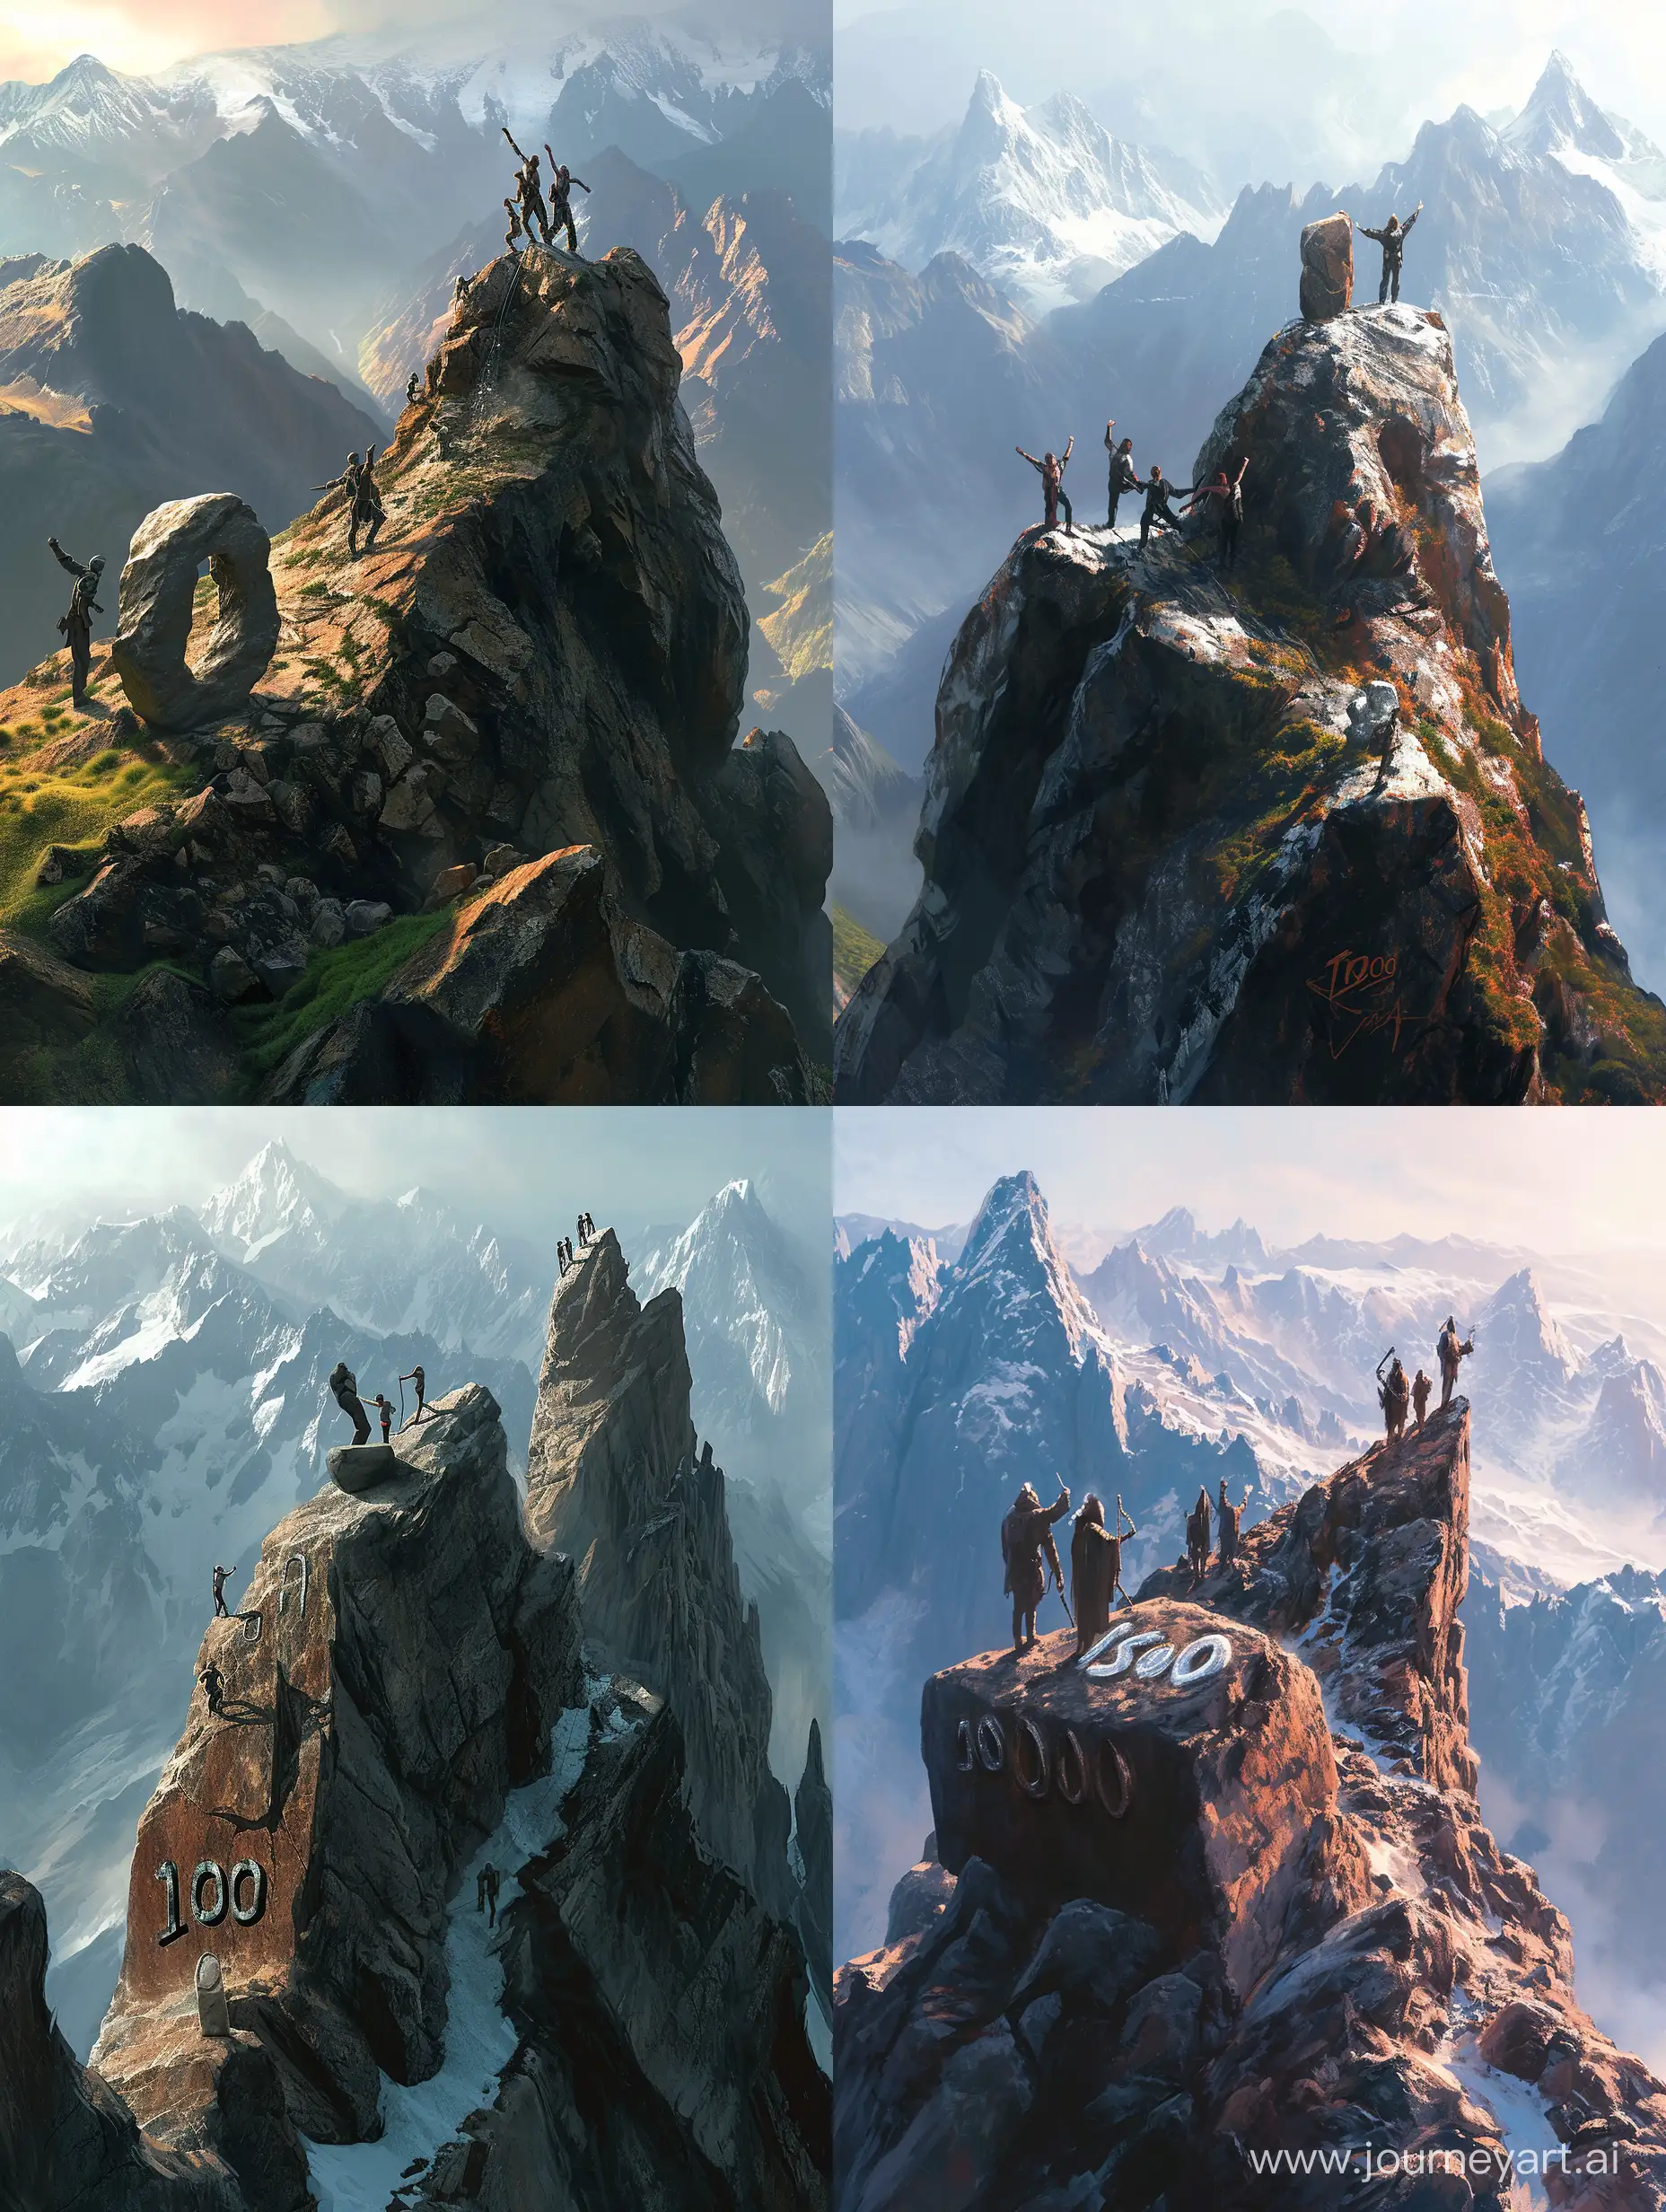 Mountain-Climbers-Reach-Summit-with-1000th-Victory-Rock